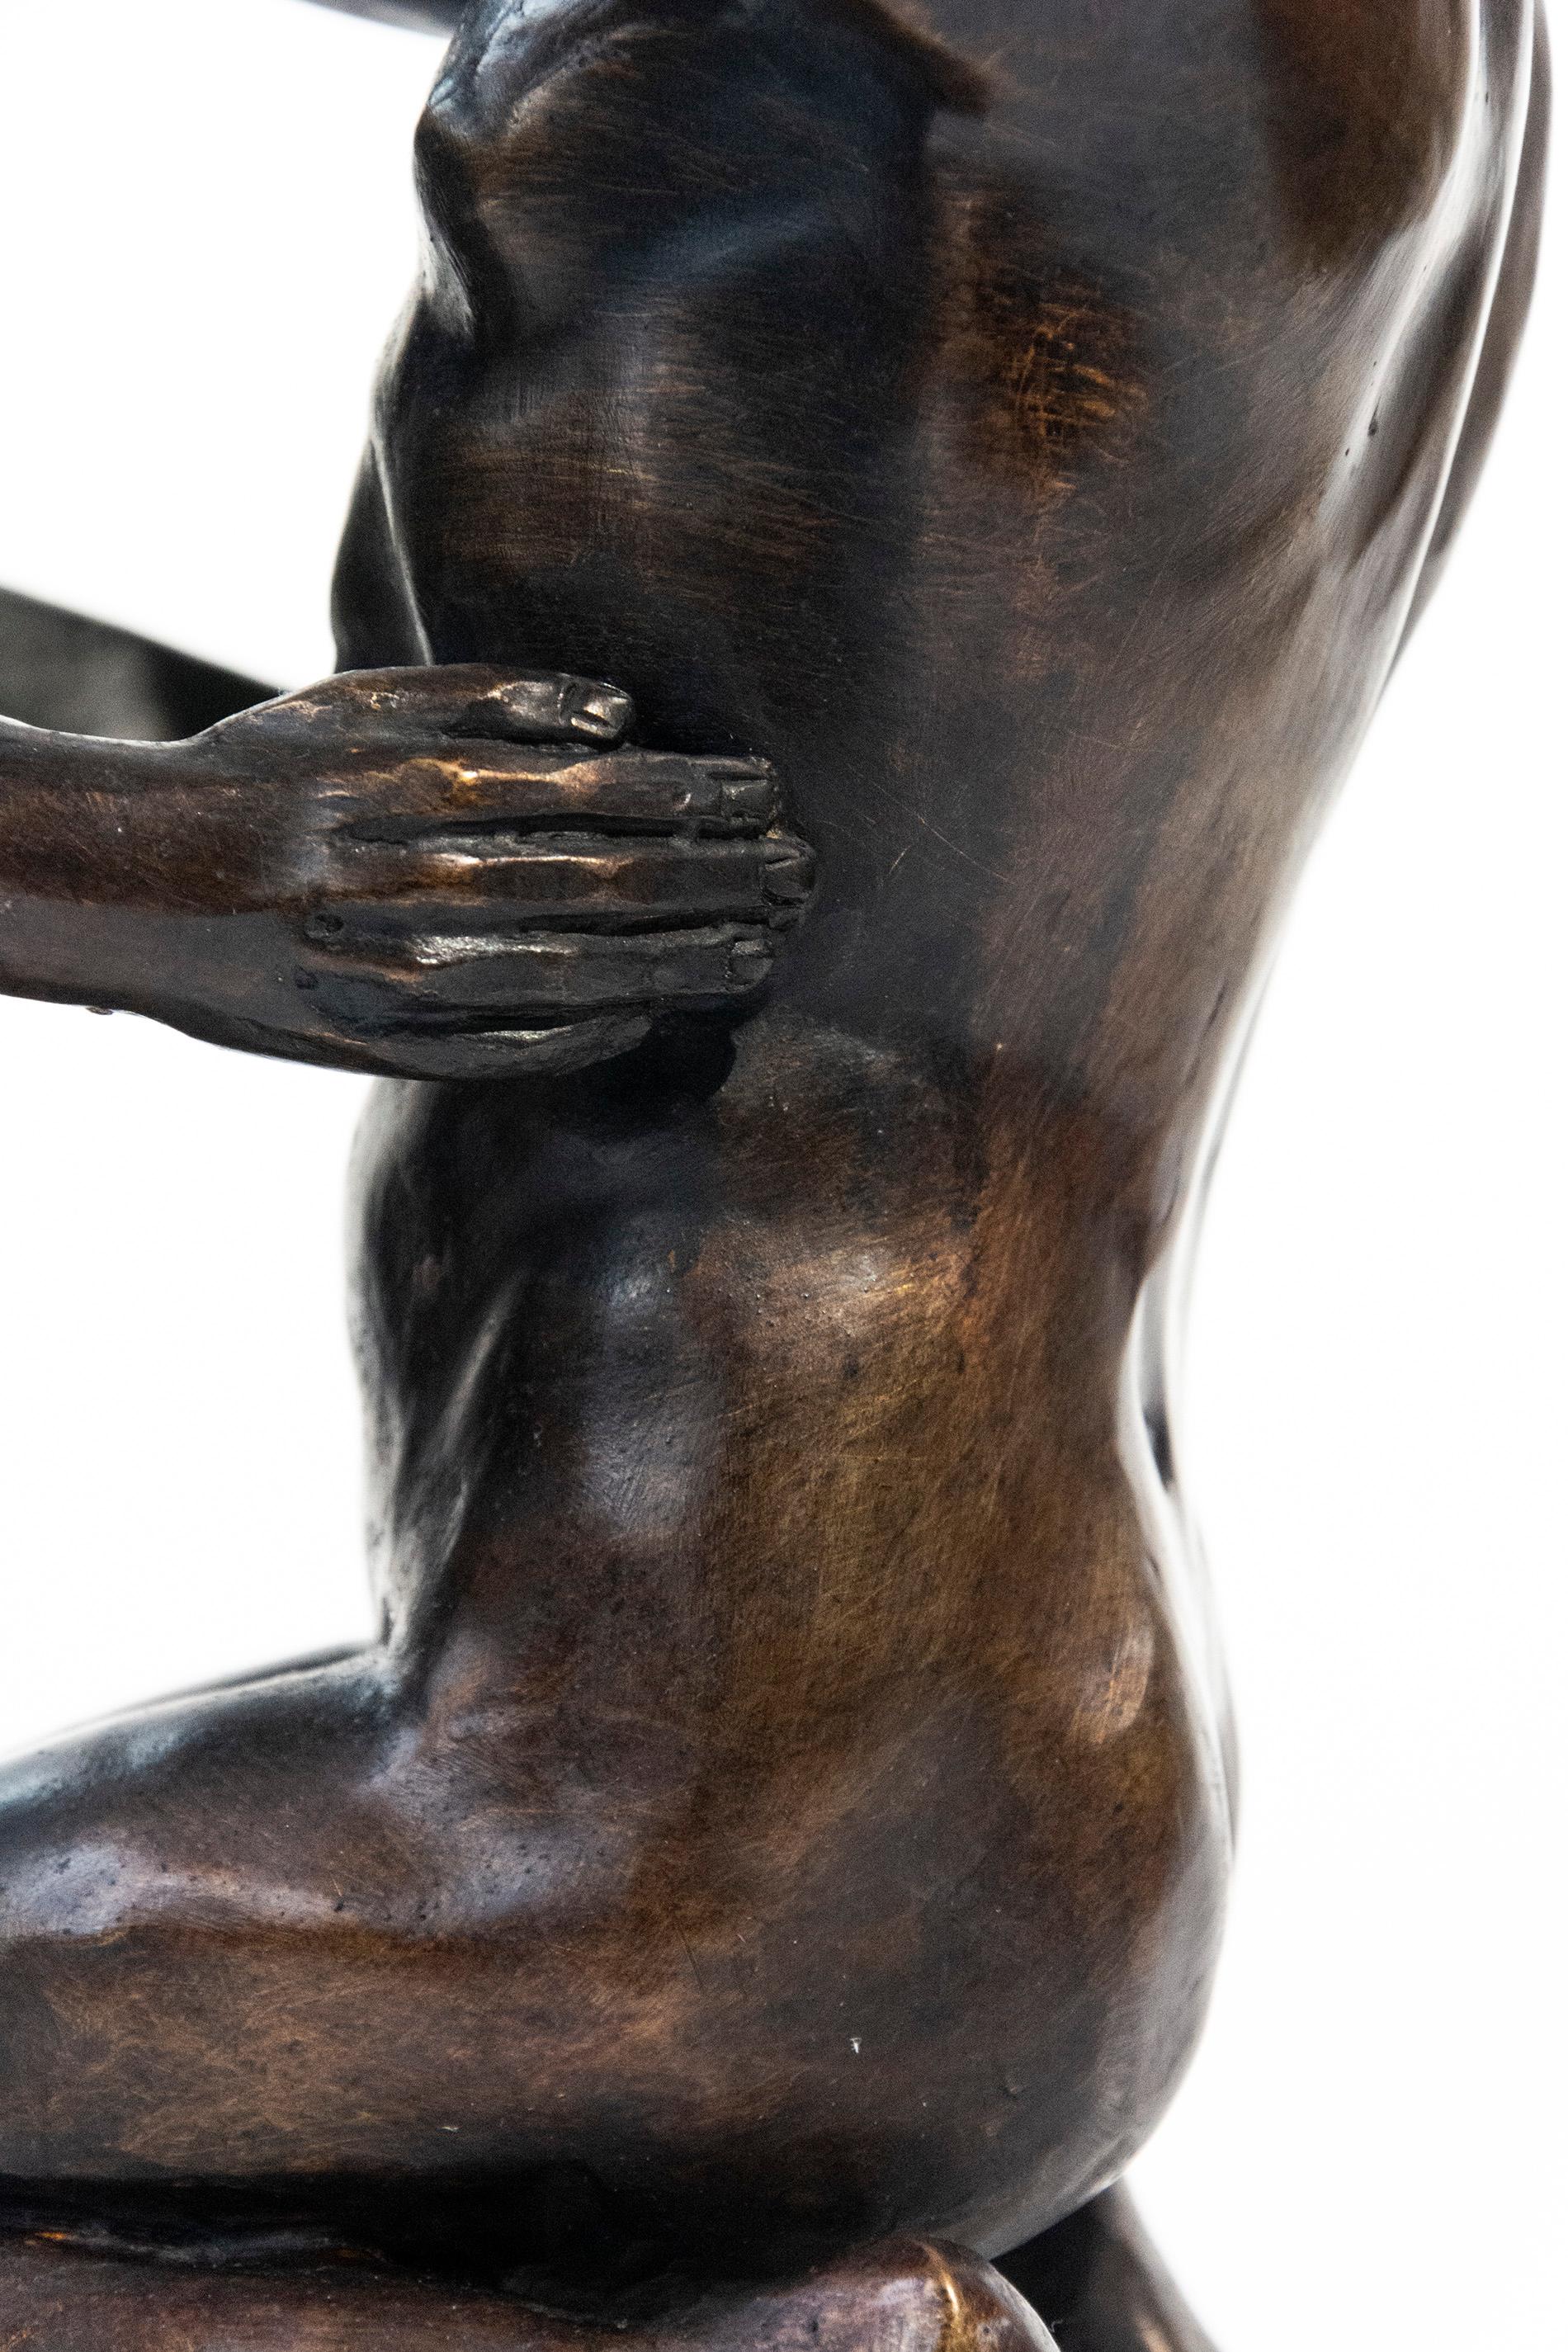 He loved being in love 12/30 - playful, figurative bronze sculpture - Gold Figurative Sculpture by Gillie and Marc Schattner